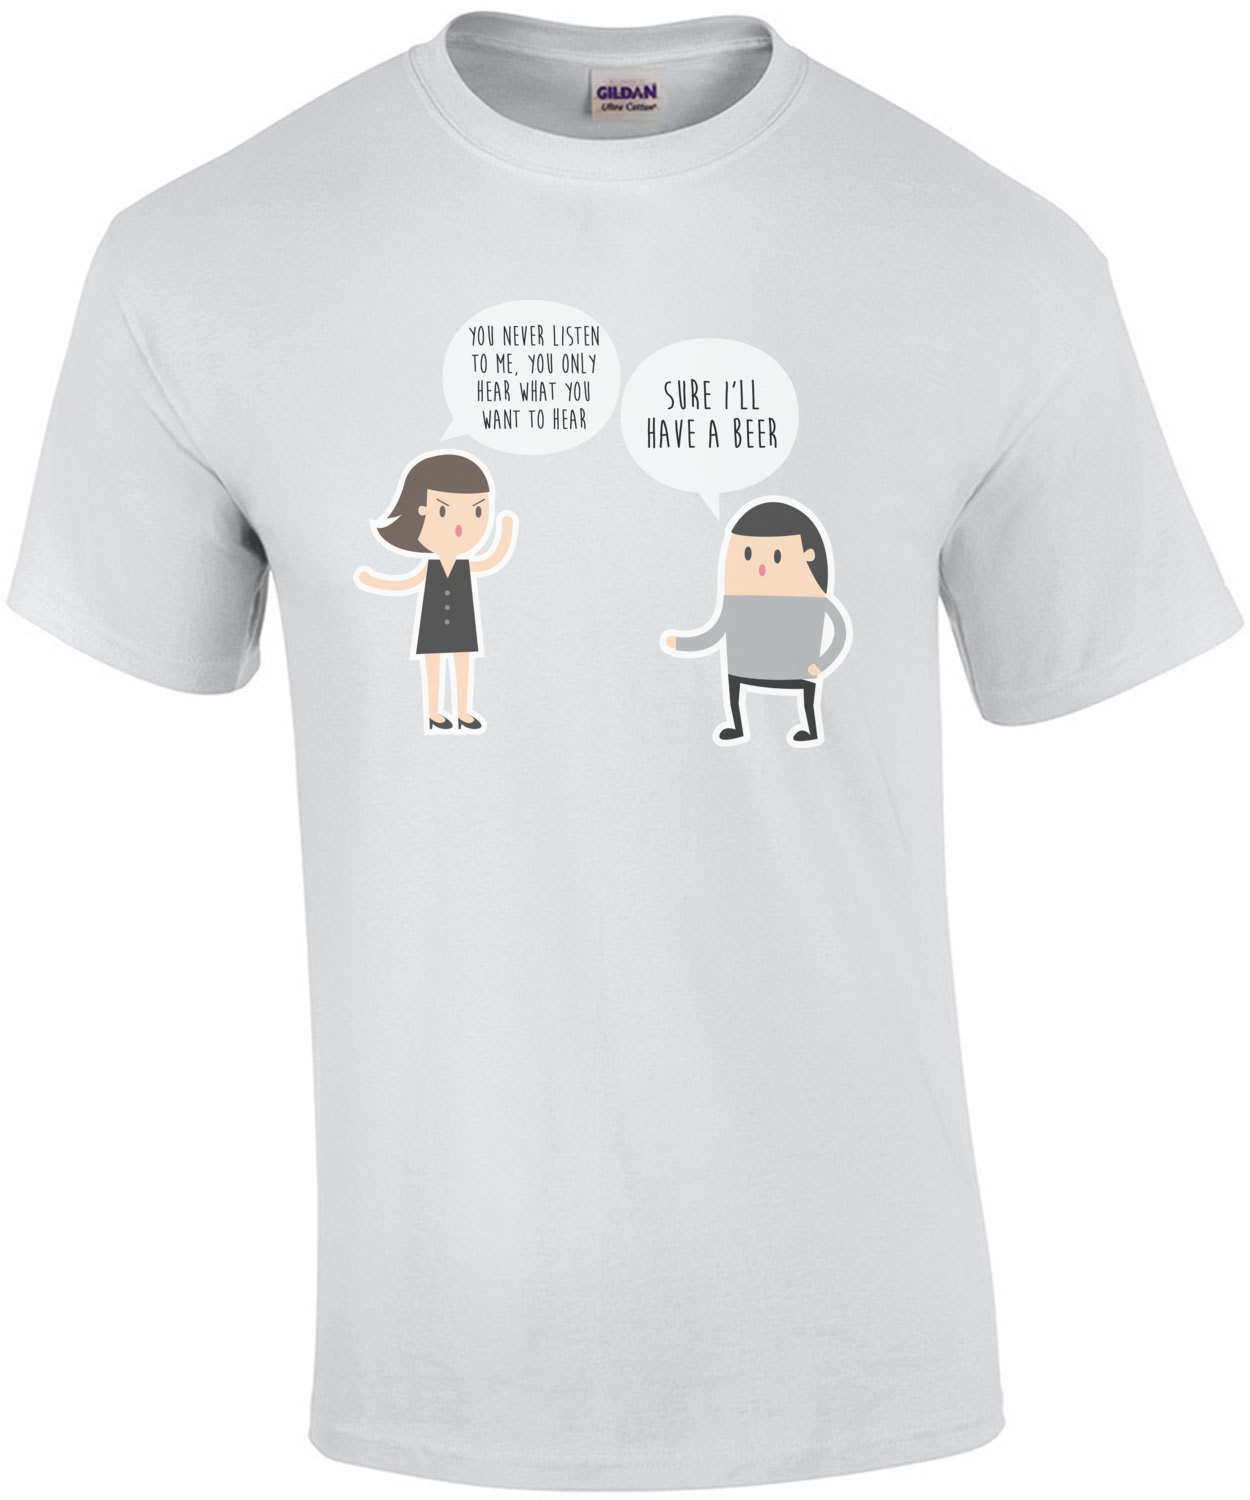 You never listen to me, you only hear what you want to hear. Sure, I'll have a beer - funny t-shirt